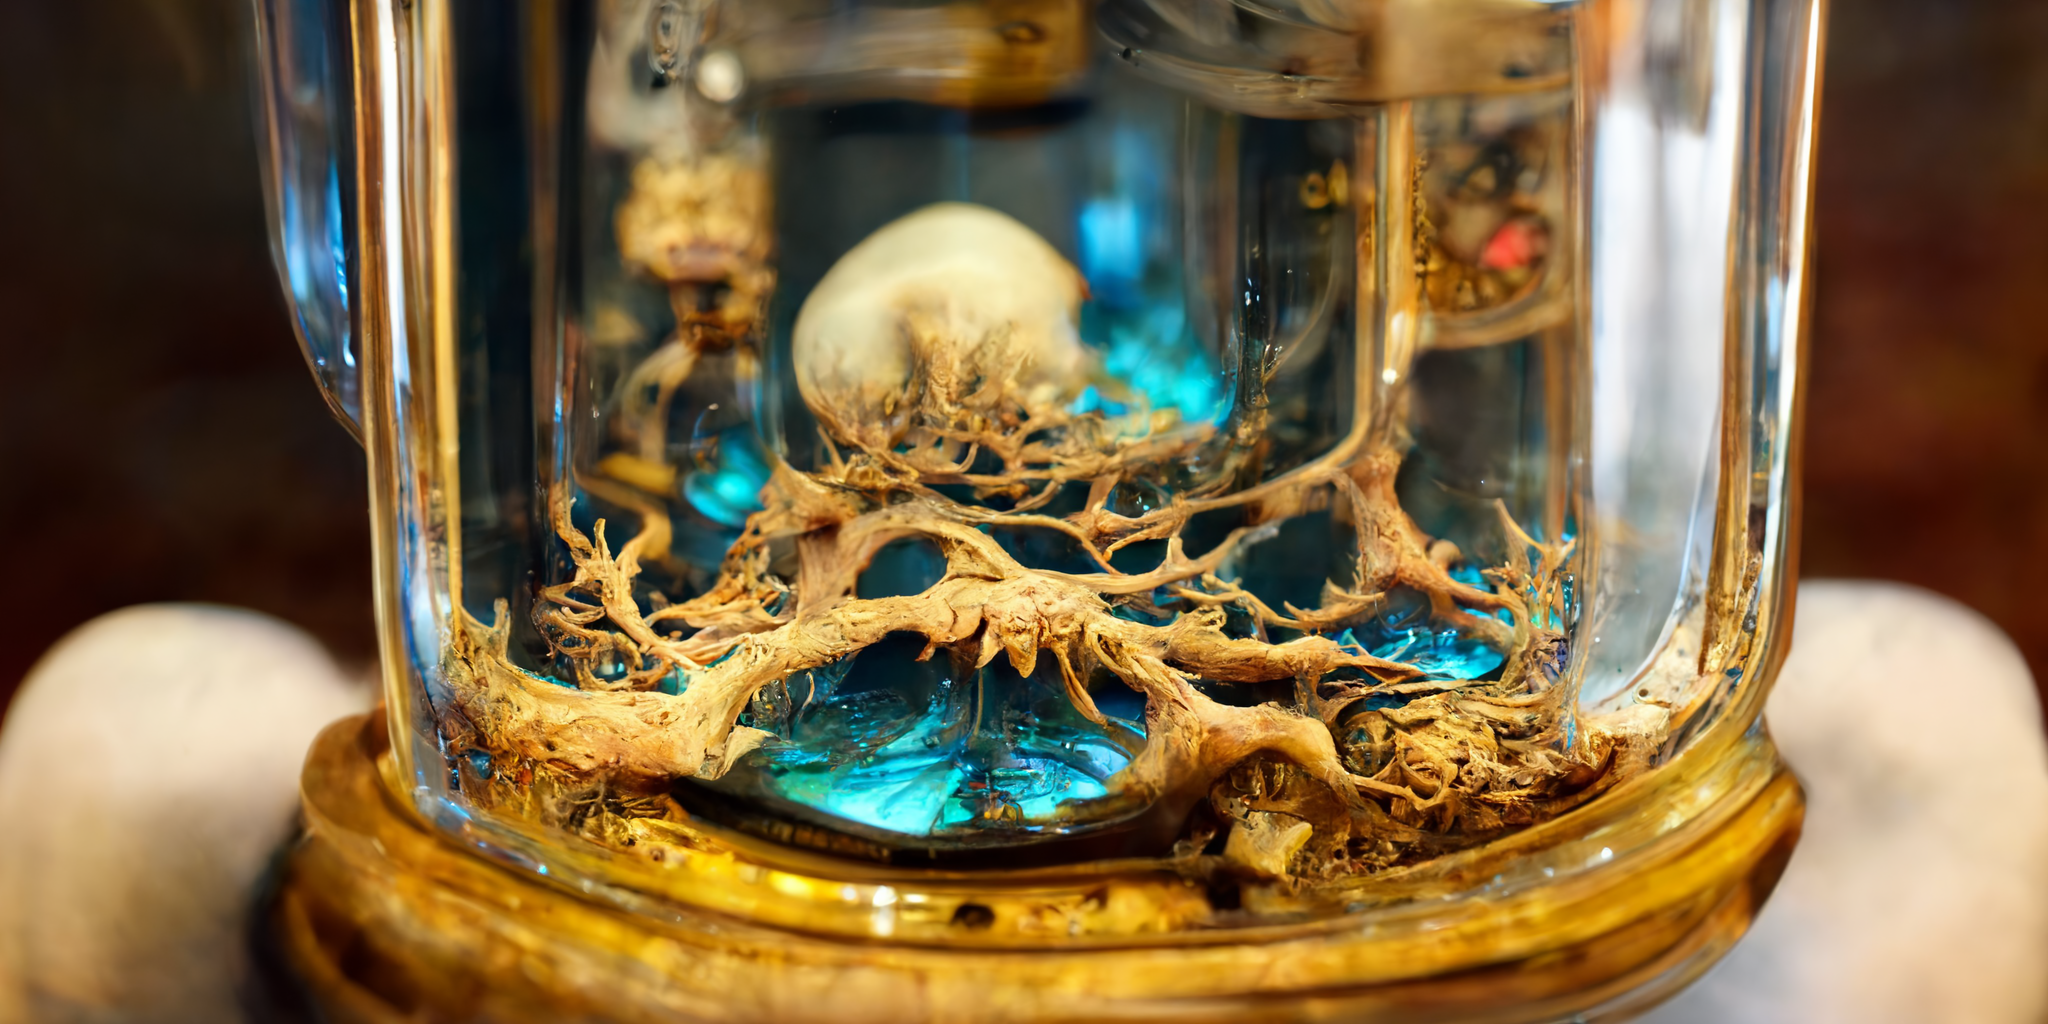 In an hourglass I cannot turn upside down – blue and gold